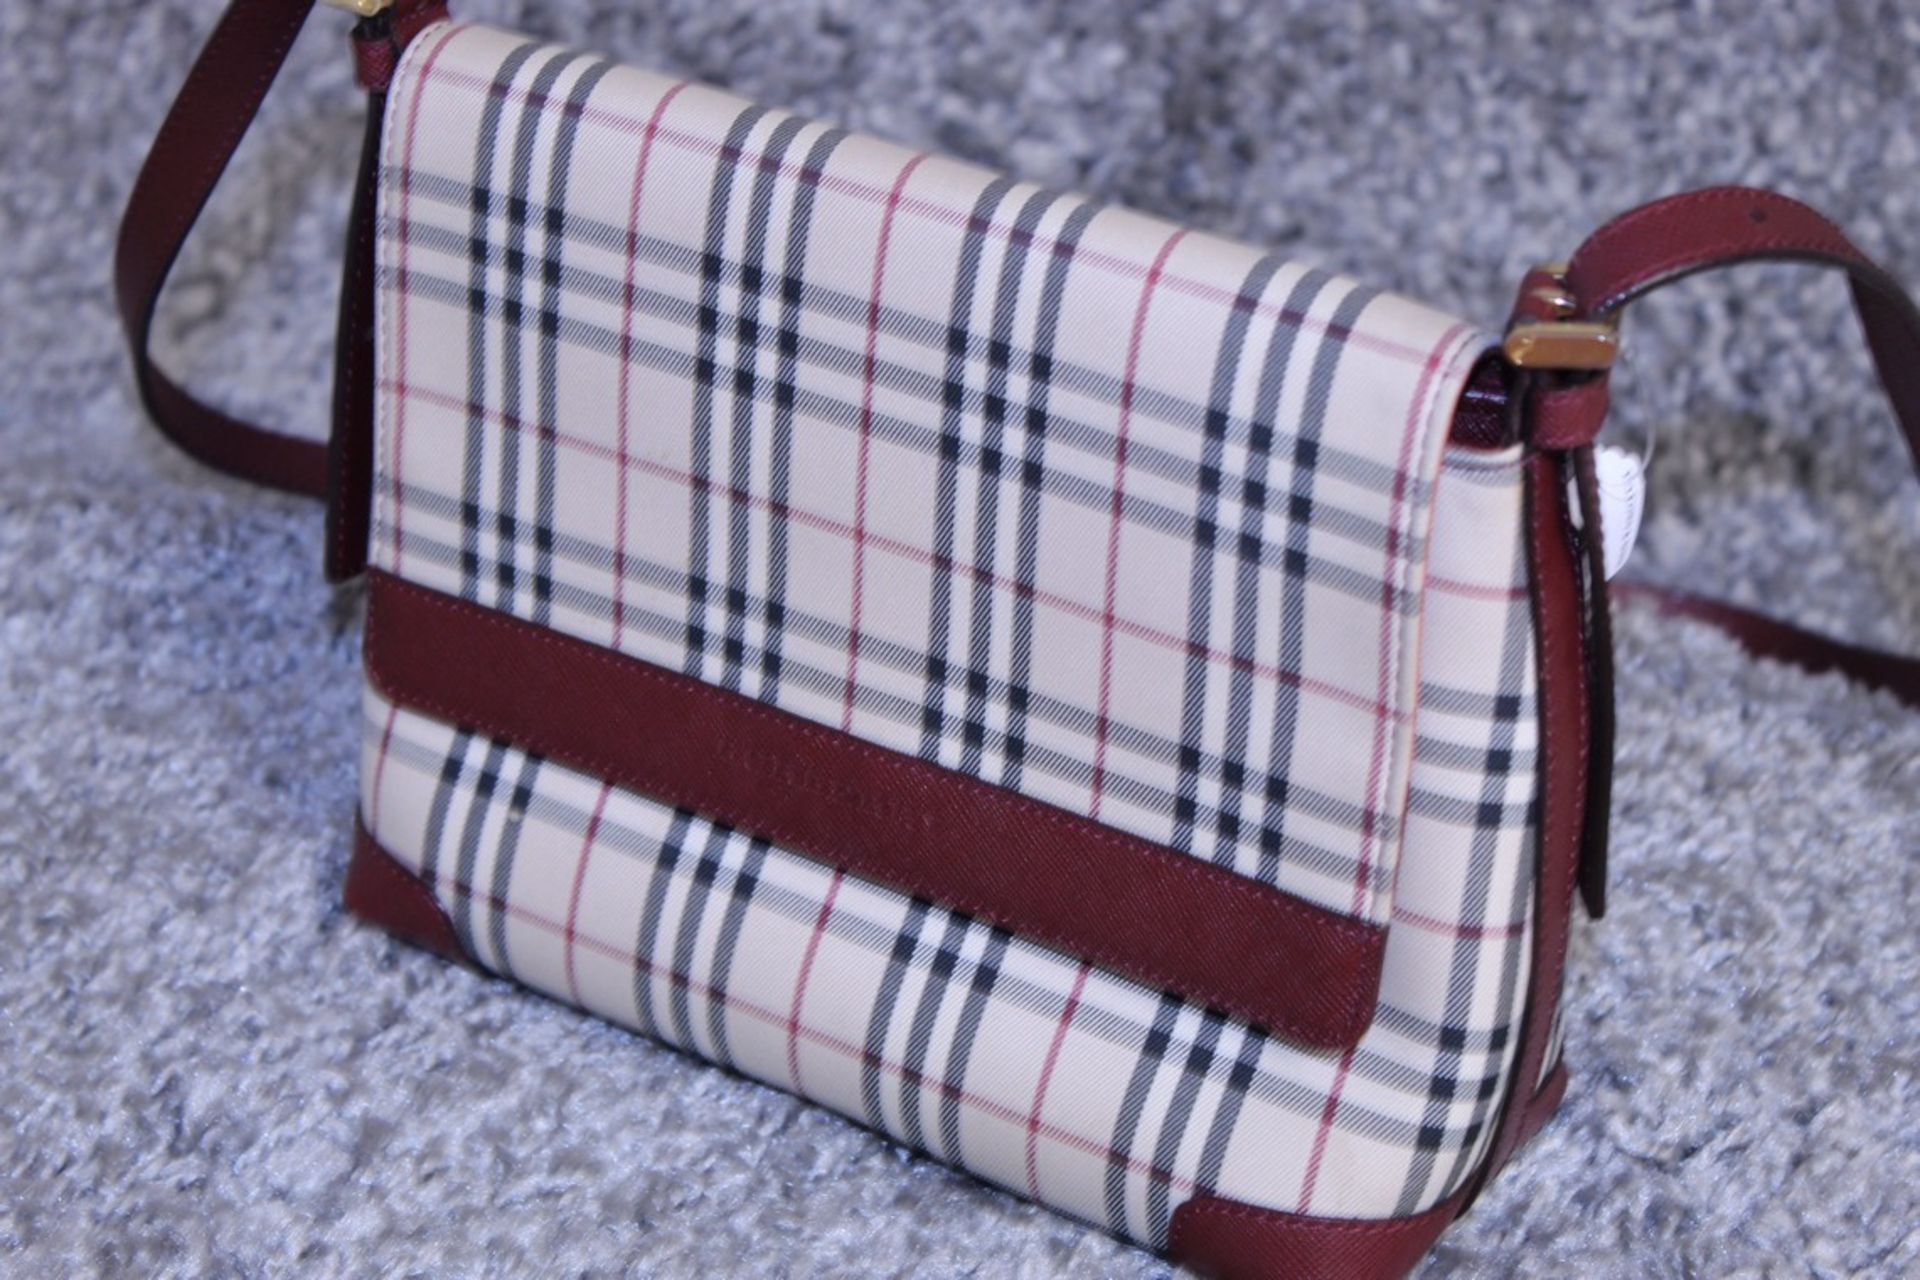 Rrp £900 Burberry Nova Shoulder Flap Bag. This Chic Shoulder Bag Is Made Out Of The Classic Burberry - Image 2 of 5